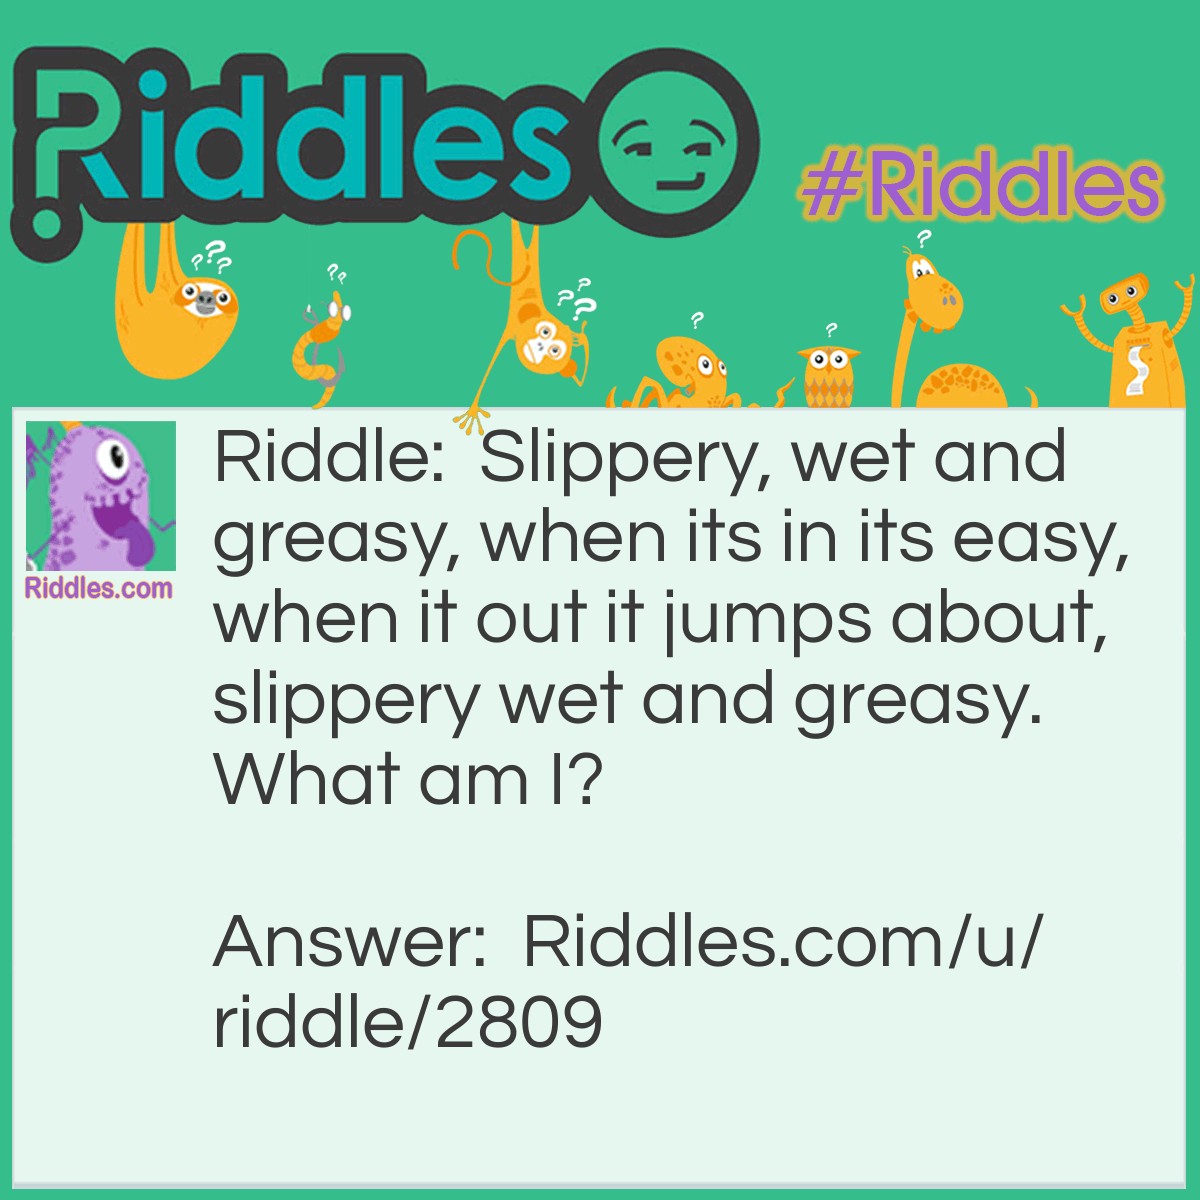 Riddle: Slippery, wet and greasy, when its in its easy, when it out it jumps about, slippery wet and greasy. What am I? Answer: A Fish.